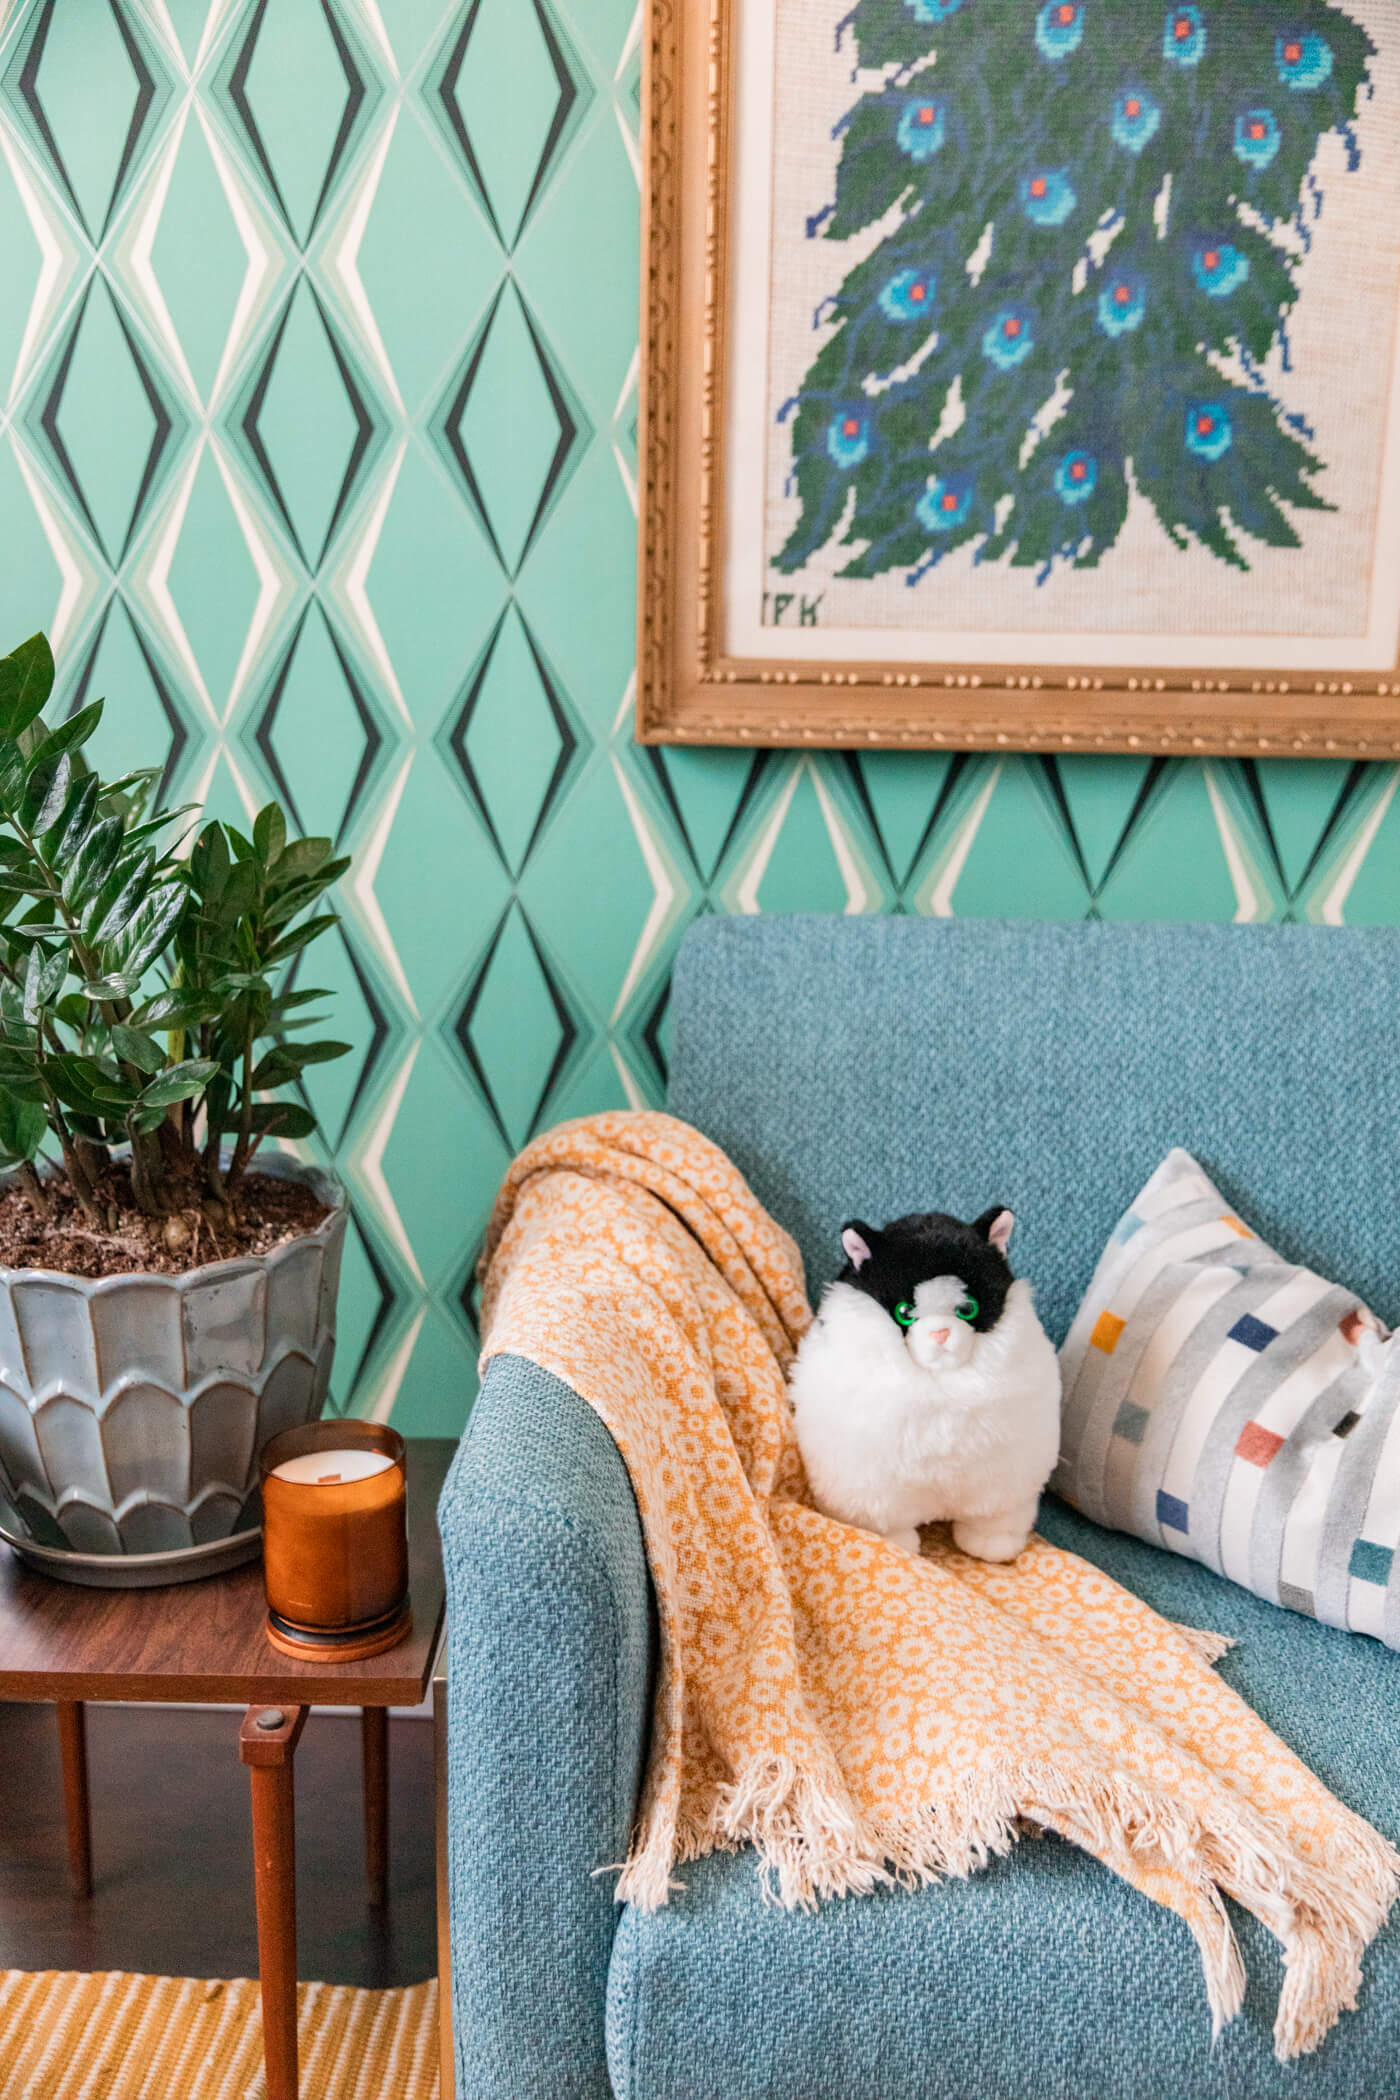 blanket and pillow on blue chair, indoor plants and candle on a corner table, and a hanging painting 